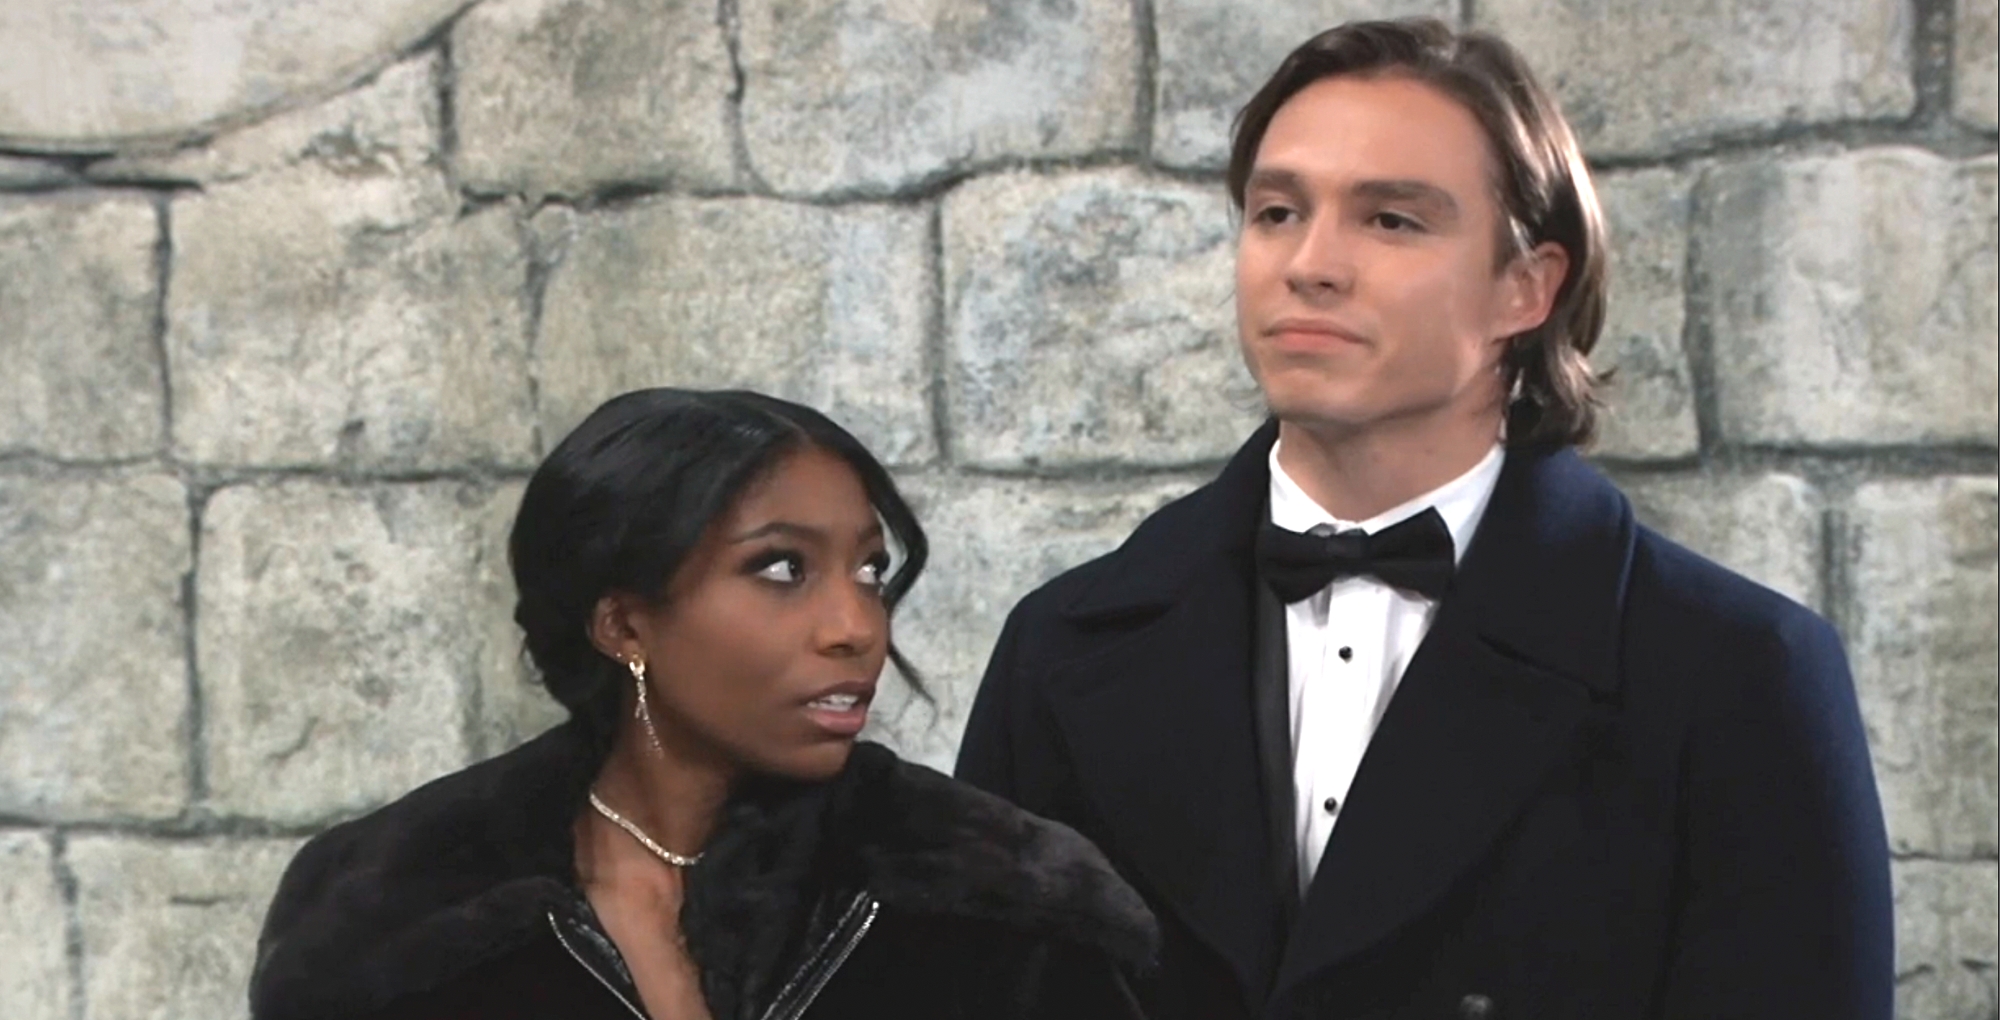 general hospital spoilers for february 20, 2023 have spencer and trina bonding